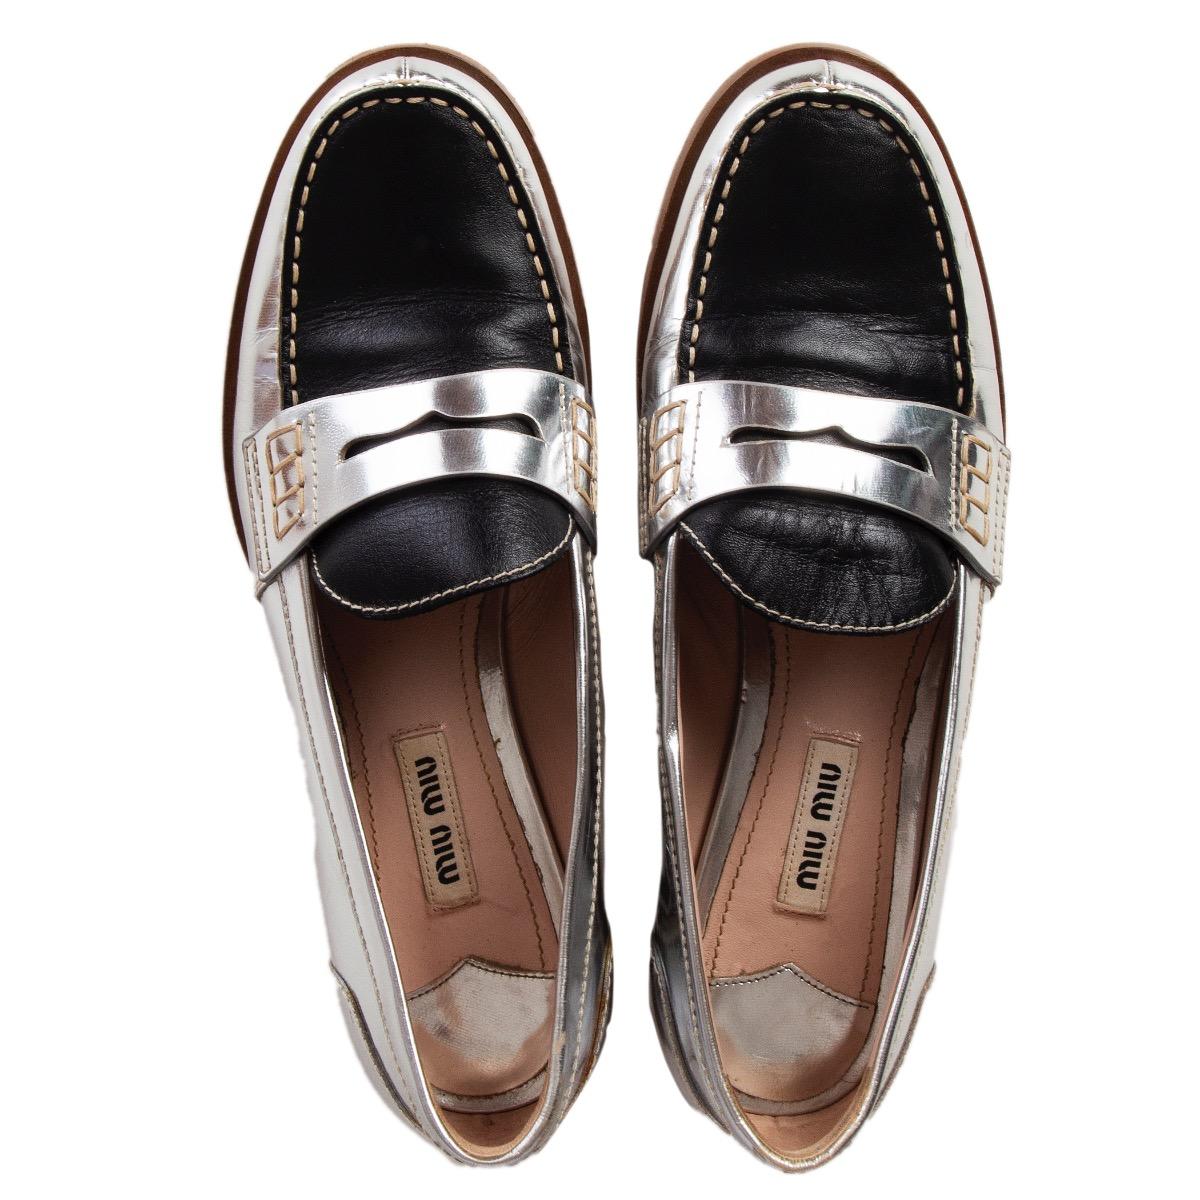 MIU MIU silver & black leather PENNY Loafers Flats Shoes 37.5 1